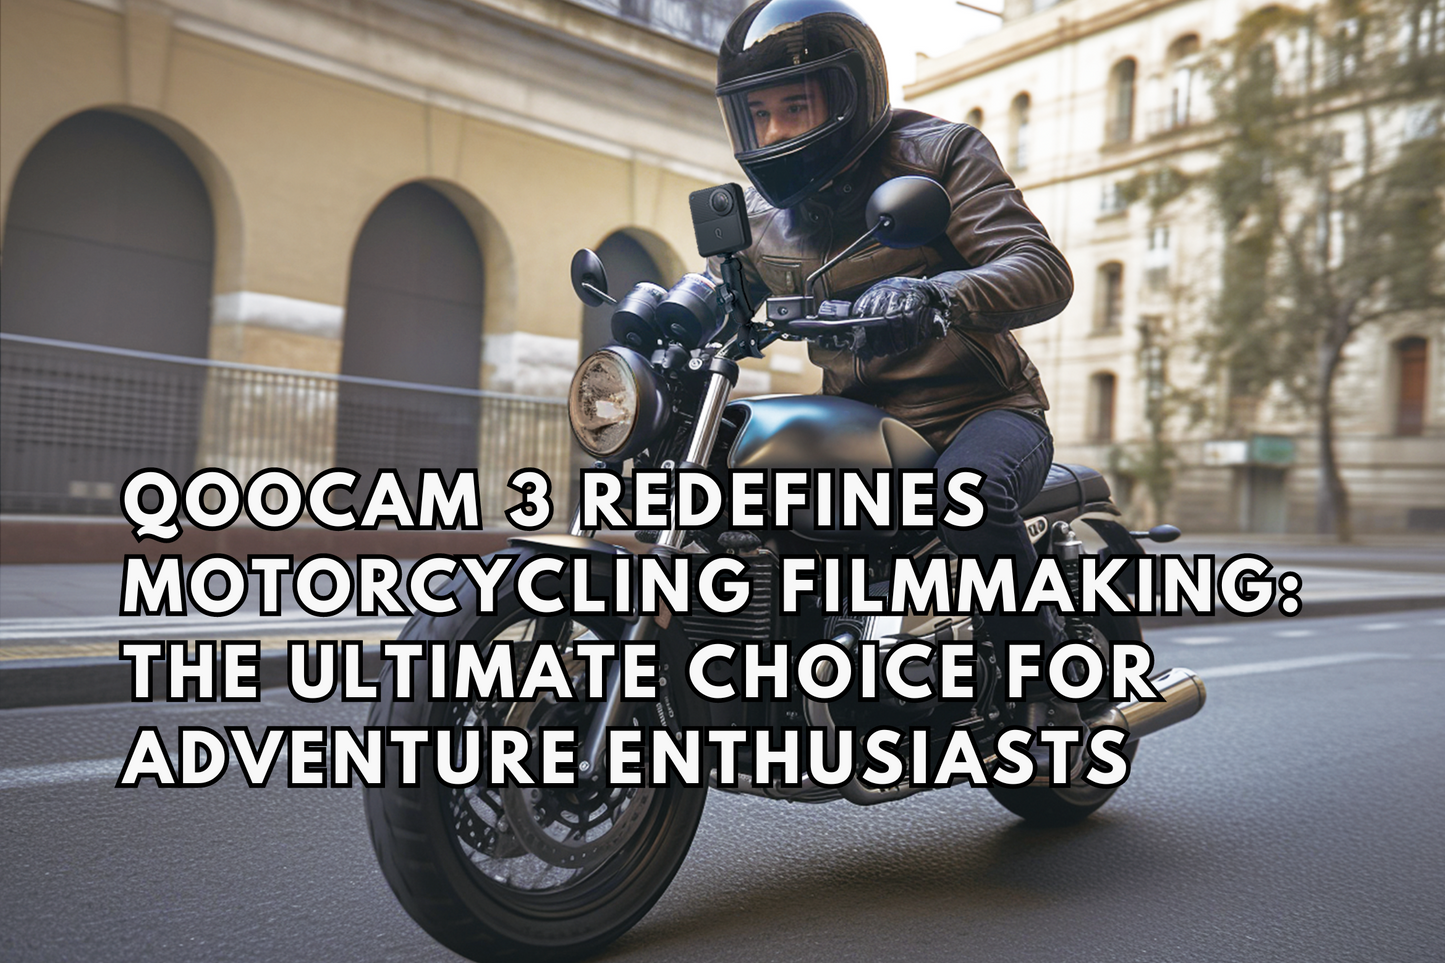 QooCam 3 Redefines Motorcycling Filmmaking: The Ultimate Choice for Adventure Enthusiasts